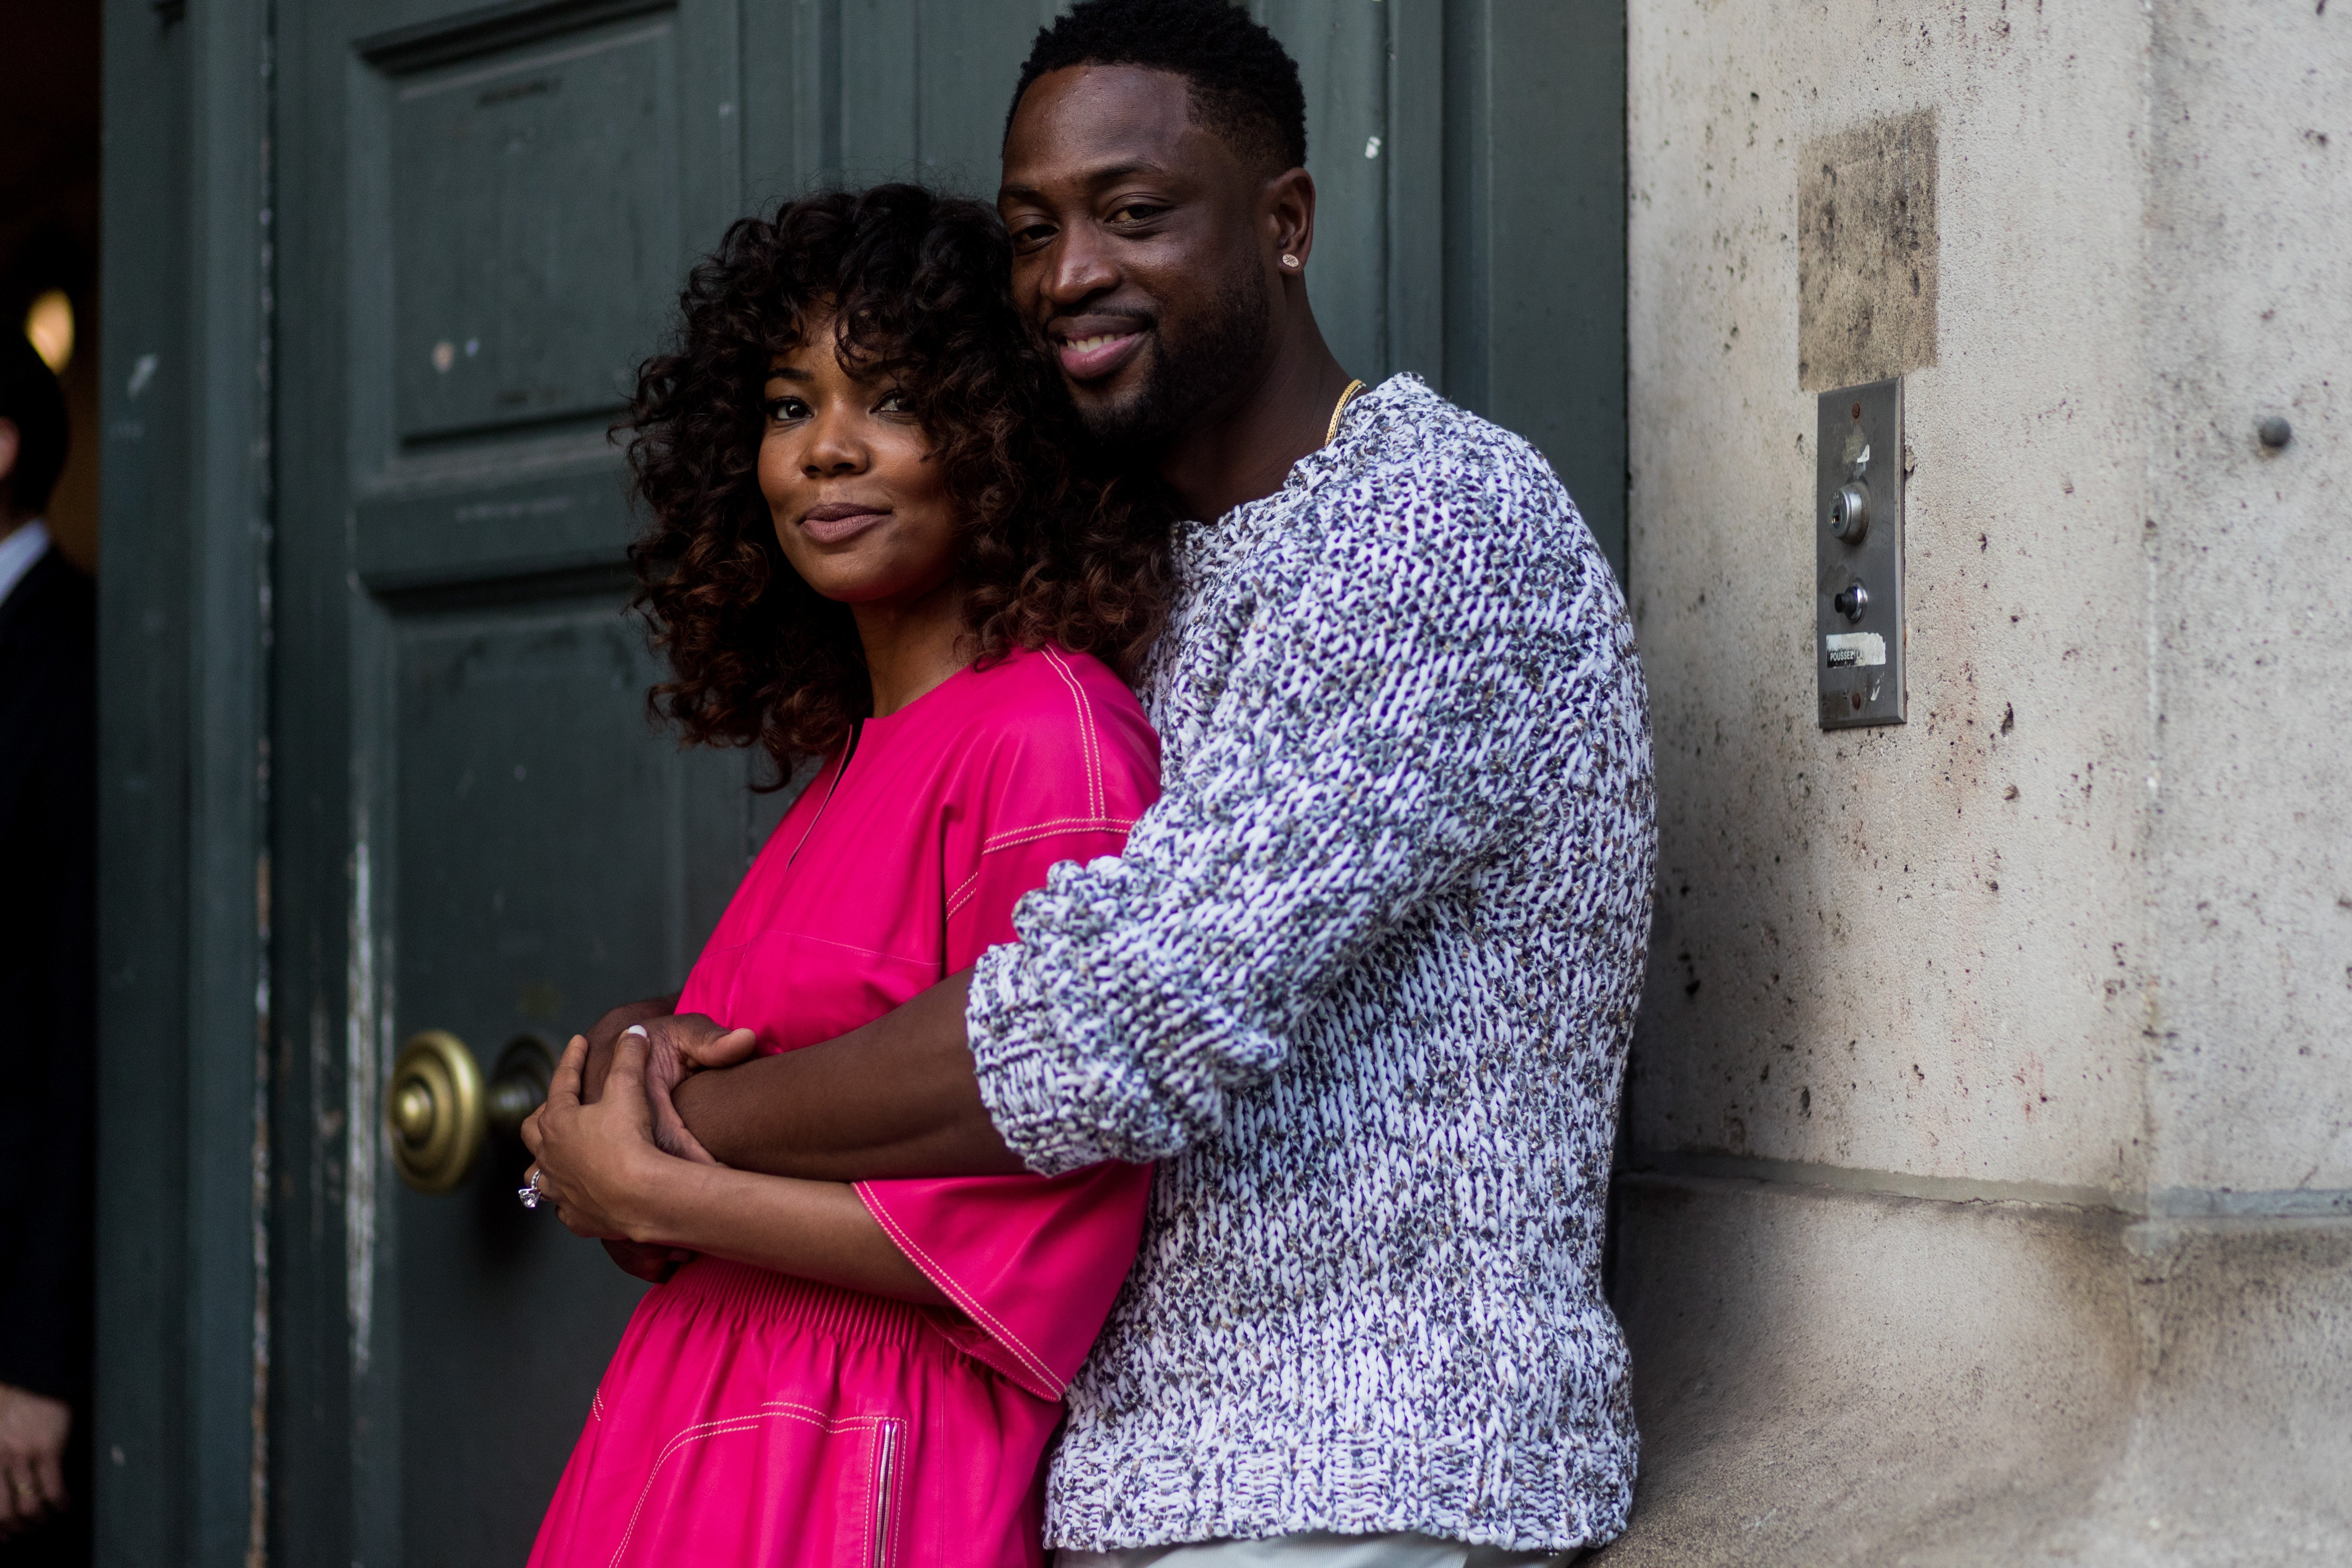 Gabrielle Union & Dwyane Wade outside Hermes during Paris Fashion Week in June 2017. | Photo: Getty Images